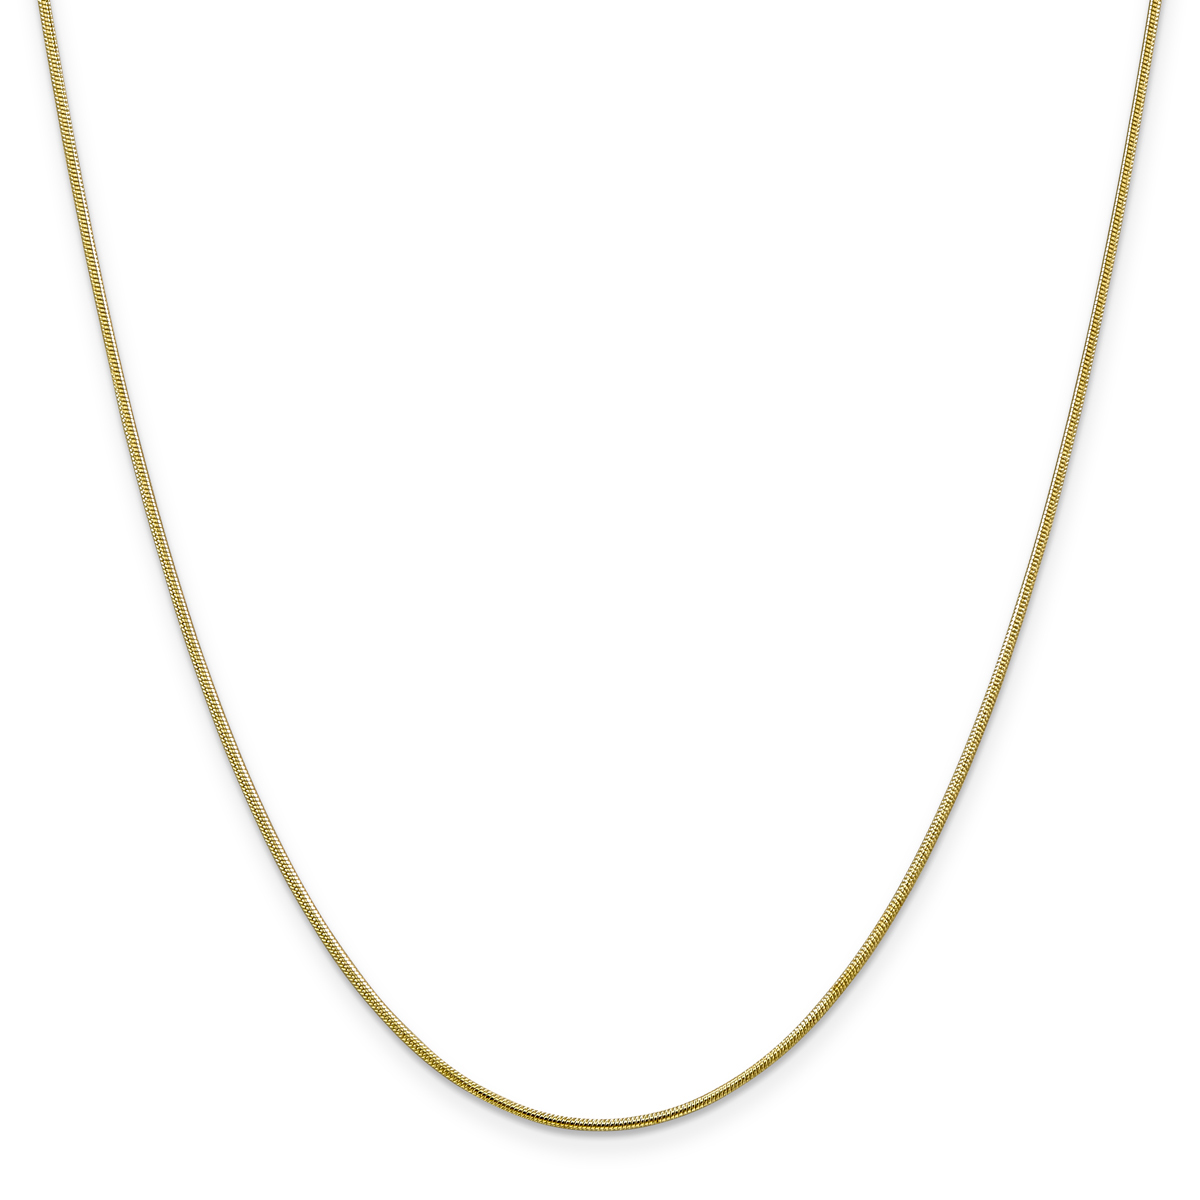 Adult Unisex Gold Classics(tm)10kt. 1.1mm 20in. Snake Chain Necklace